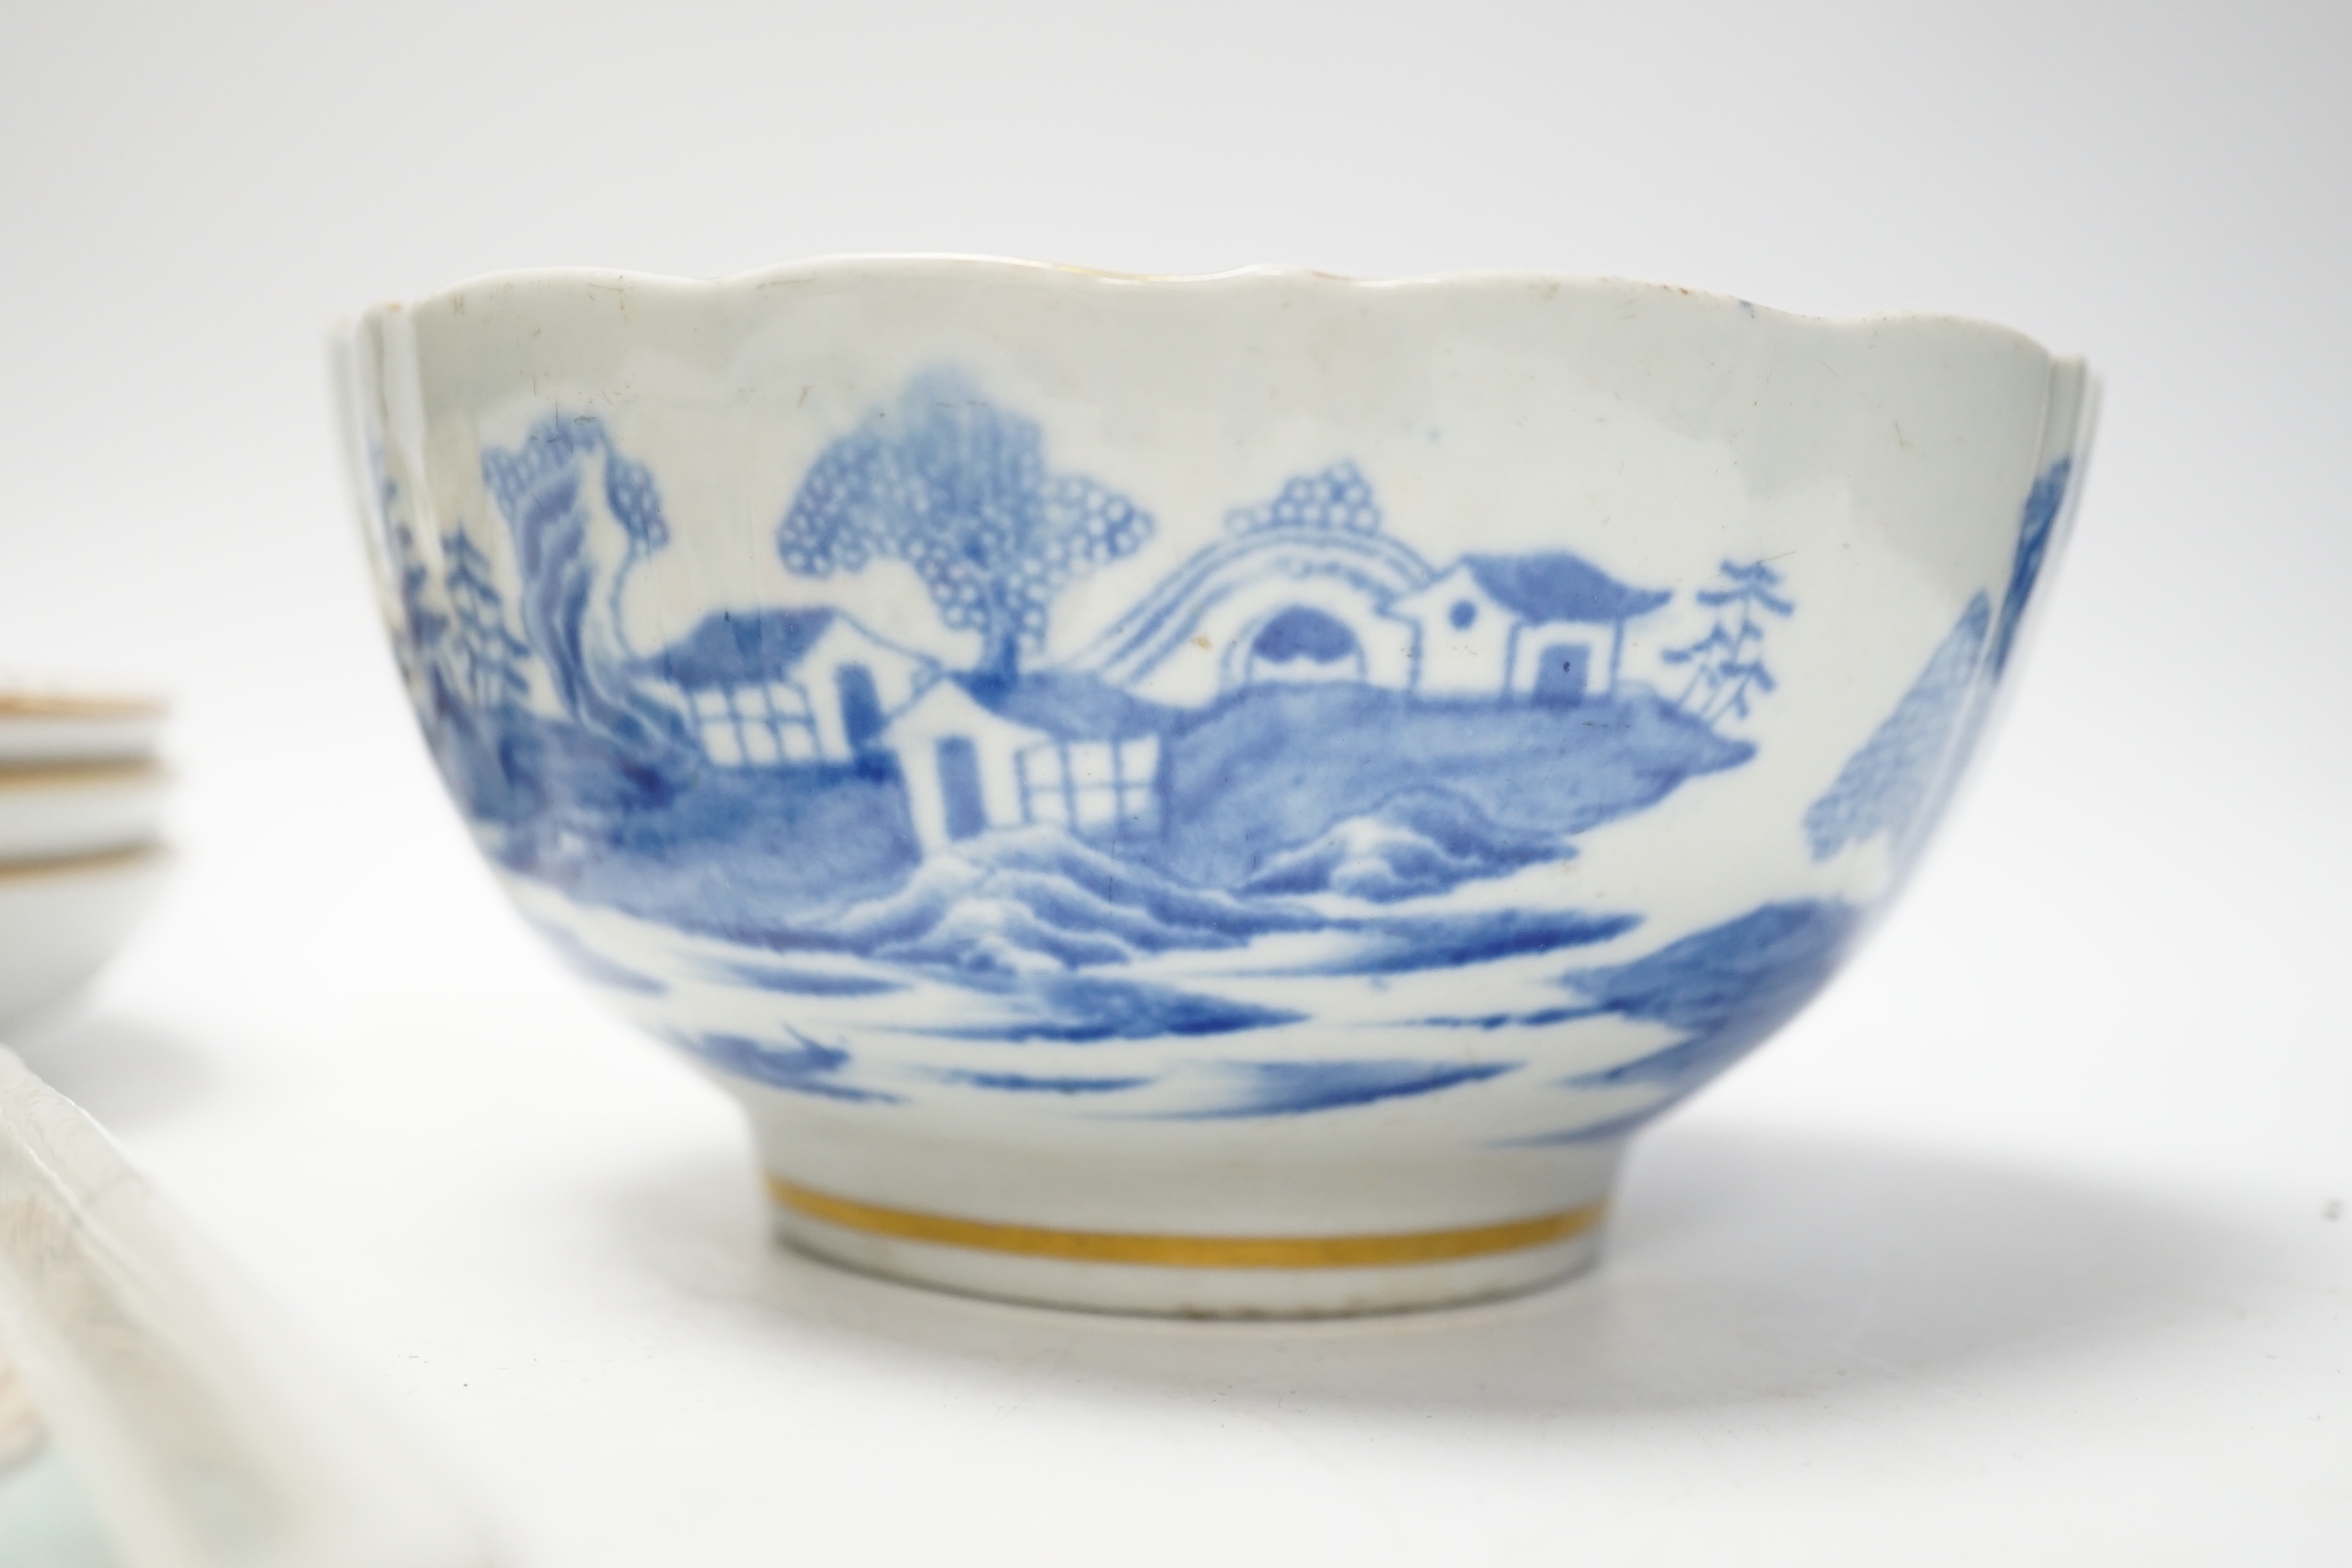 Five items of Chinese tableware; a rectangular tray, three shallow dishes, and a blue and white bowl with gilt decoration, bowl diameter, 14.5cm